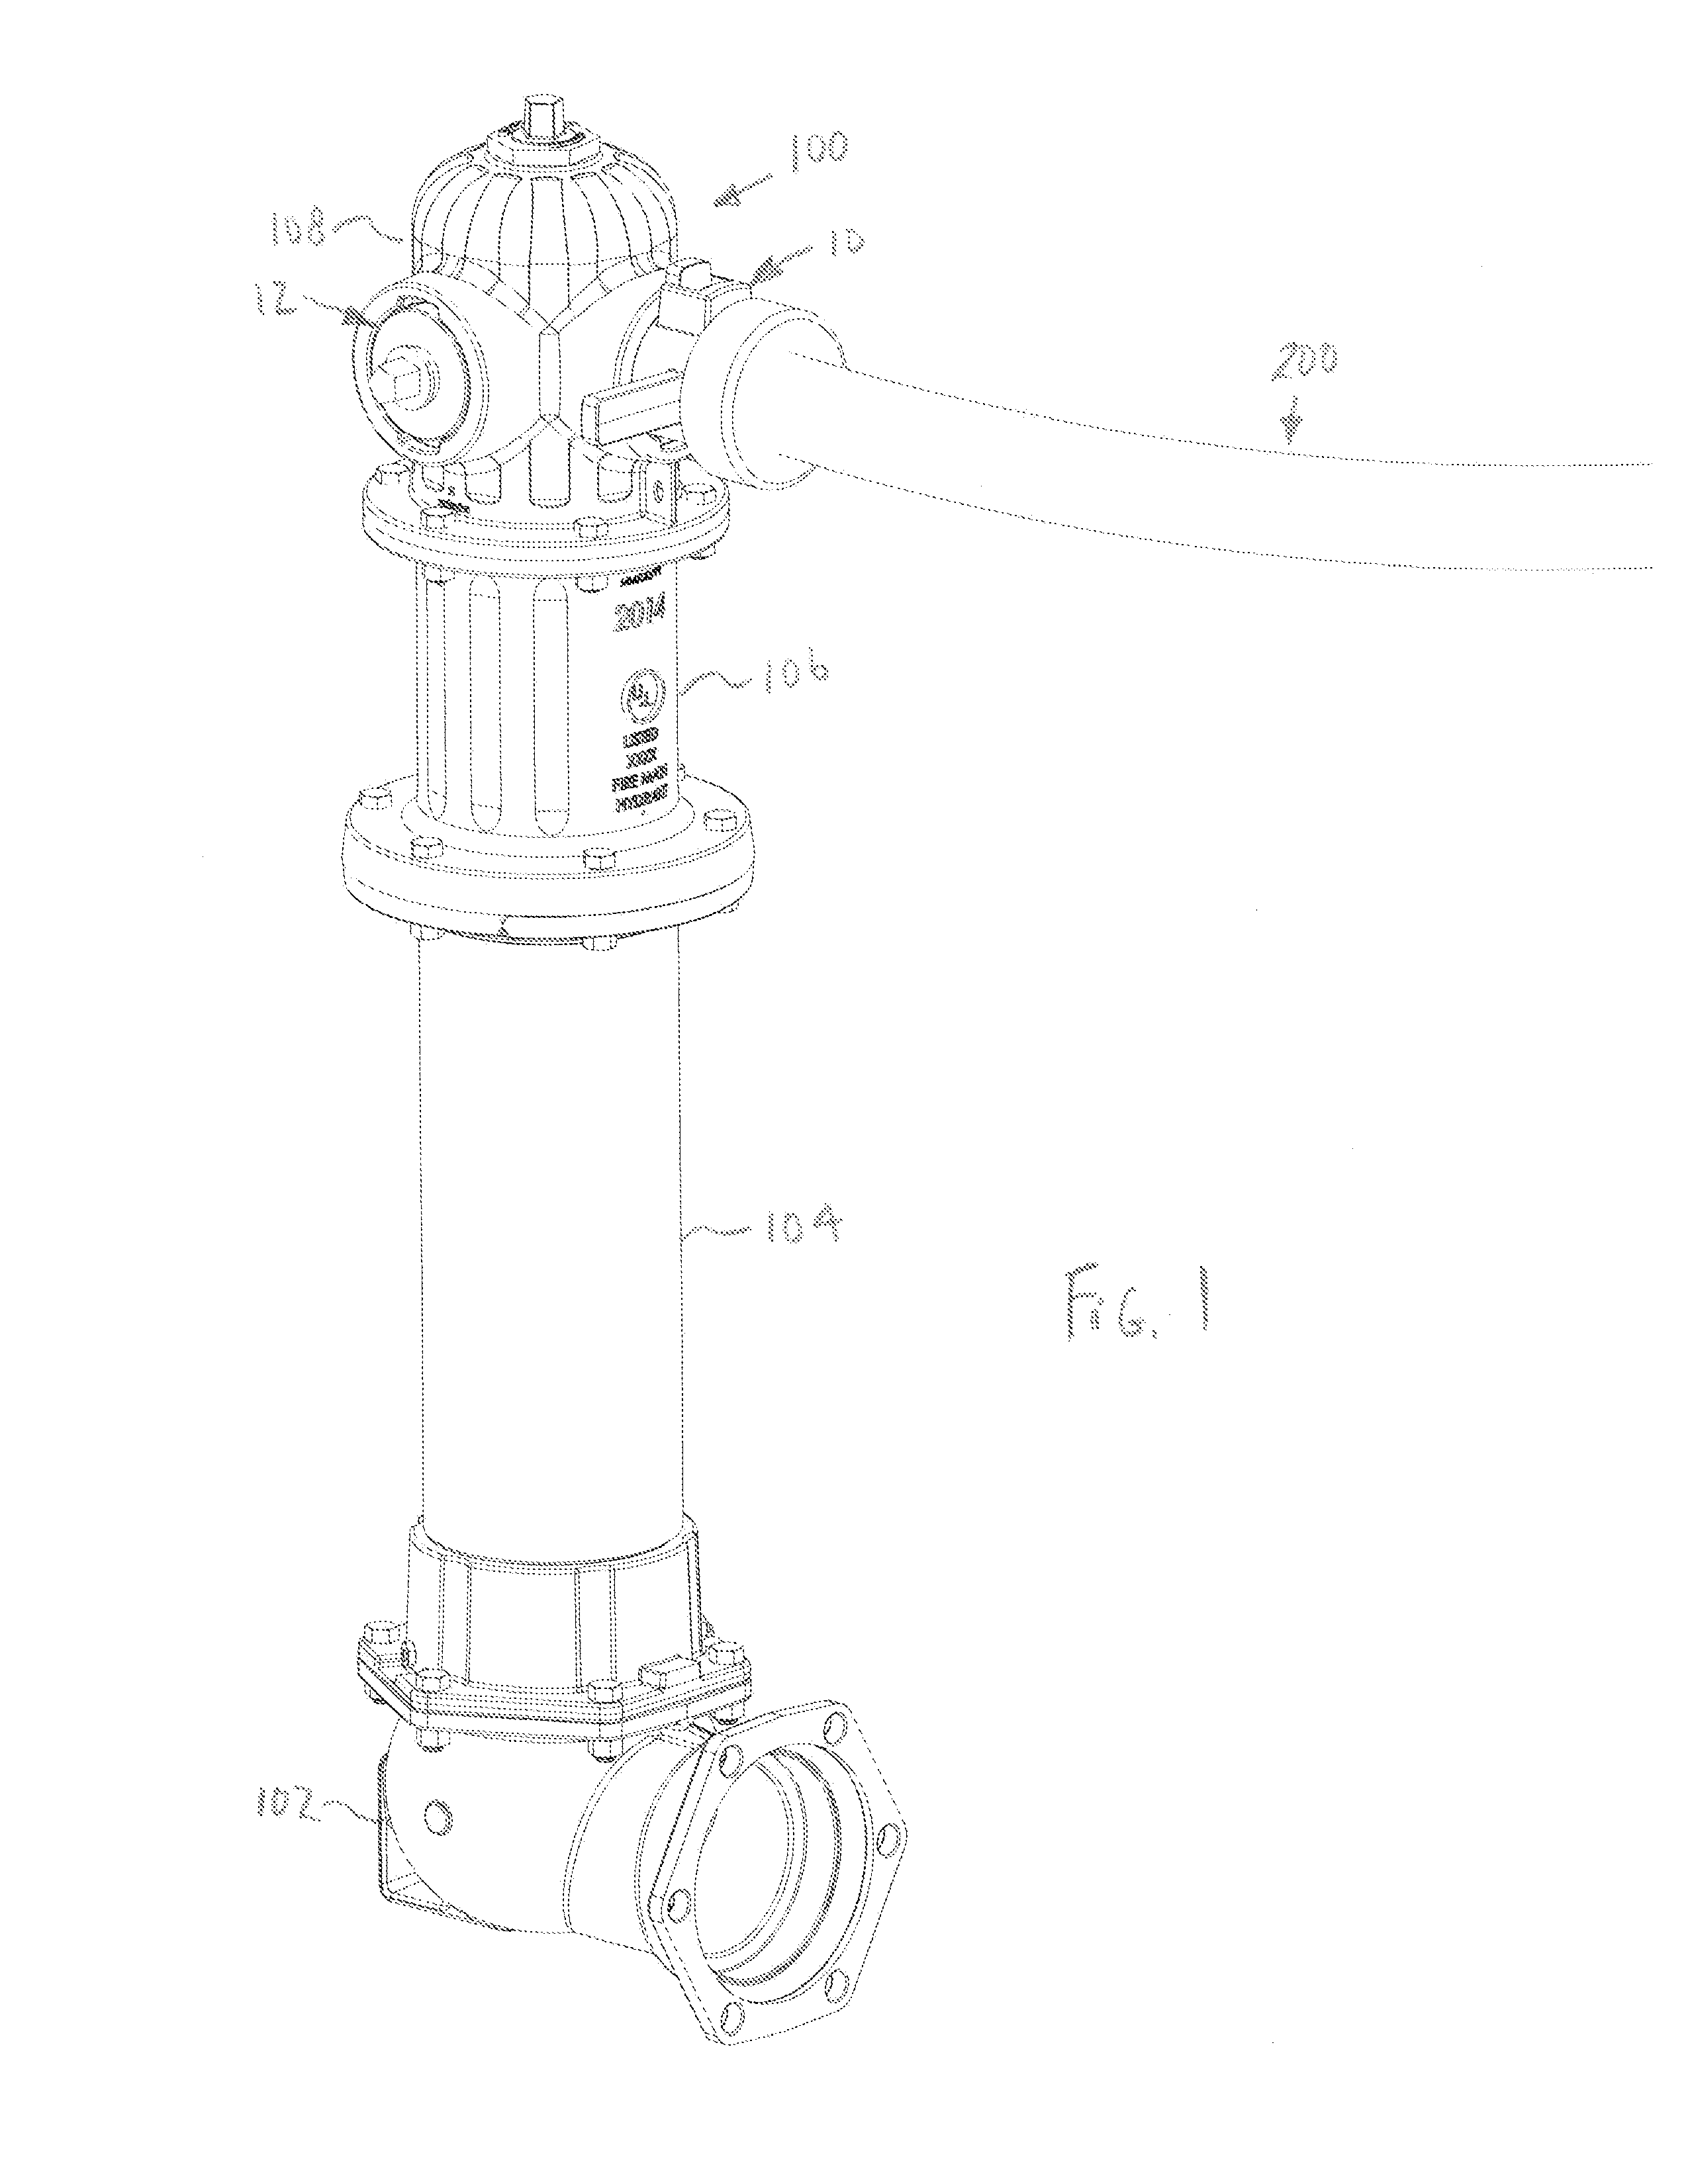 Removable fire hydrant nozzle with improved locking structure